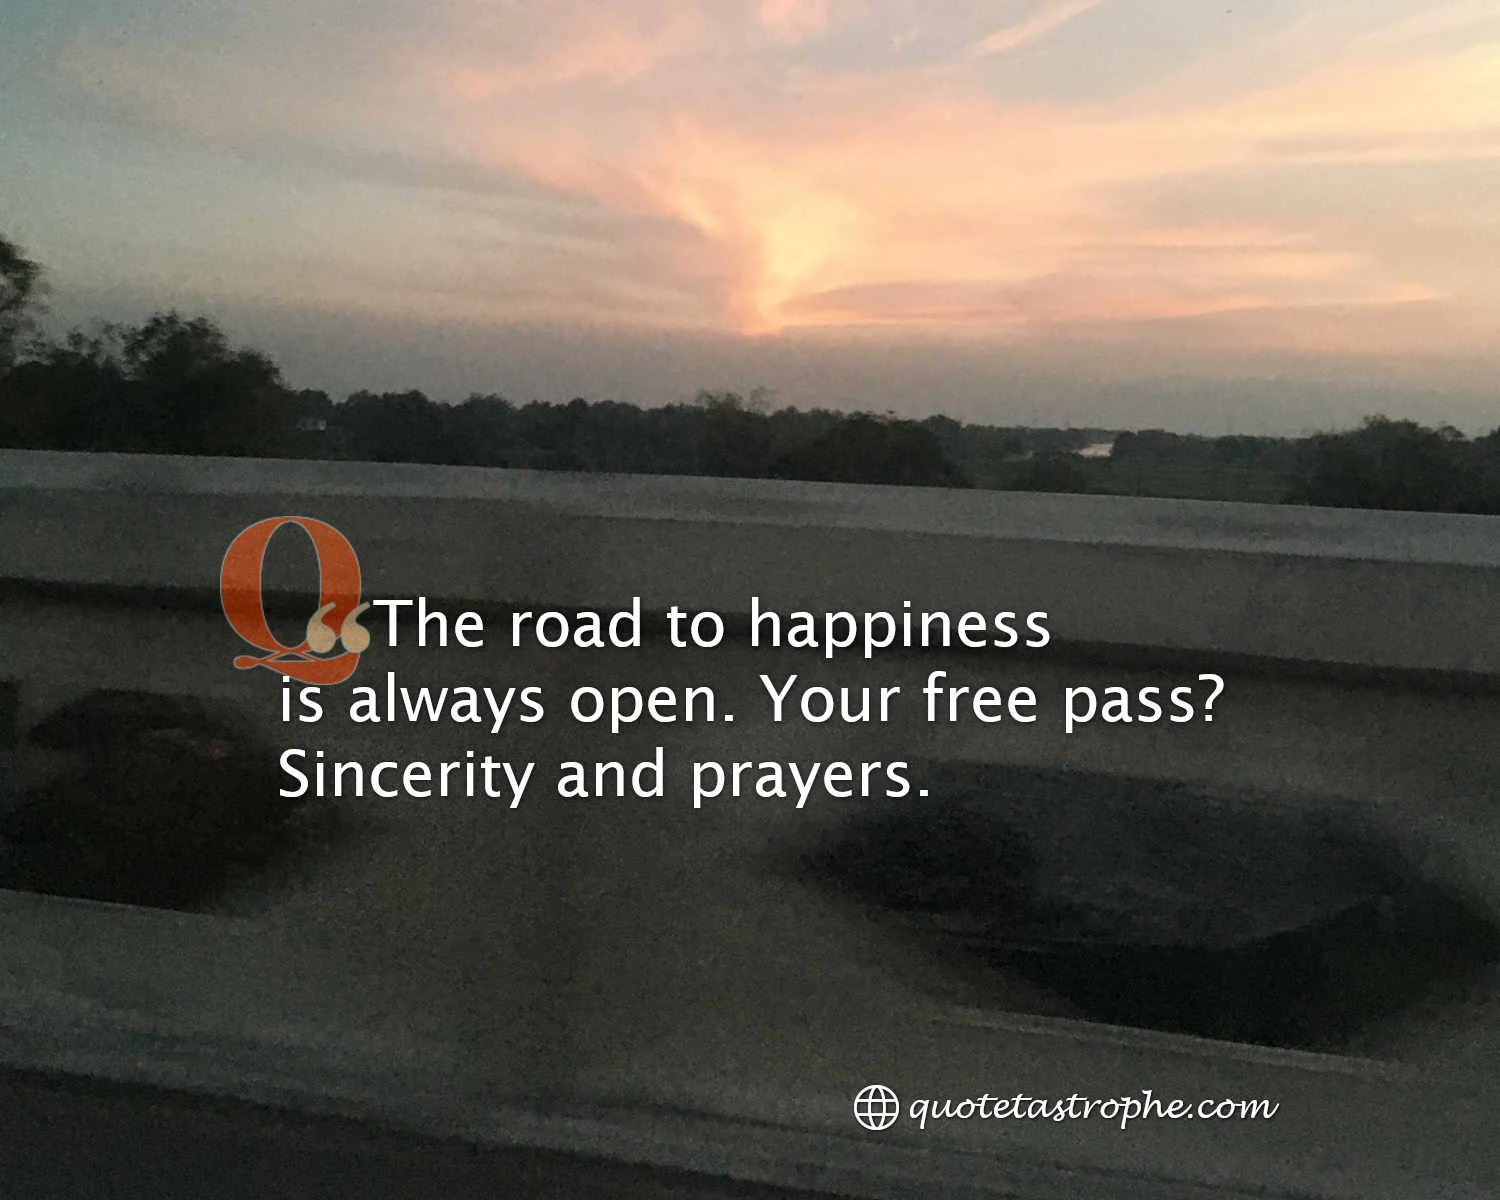 The Road To Happiness is Always Open